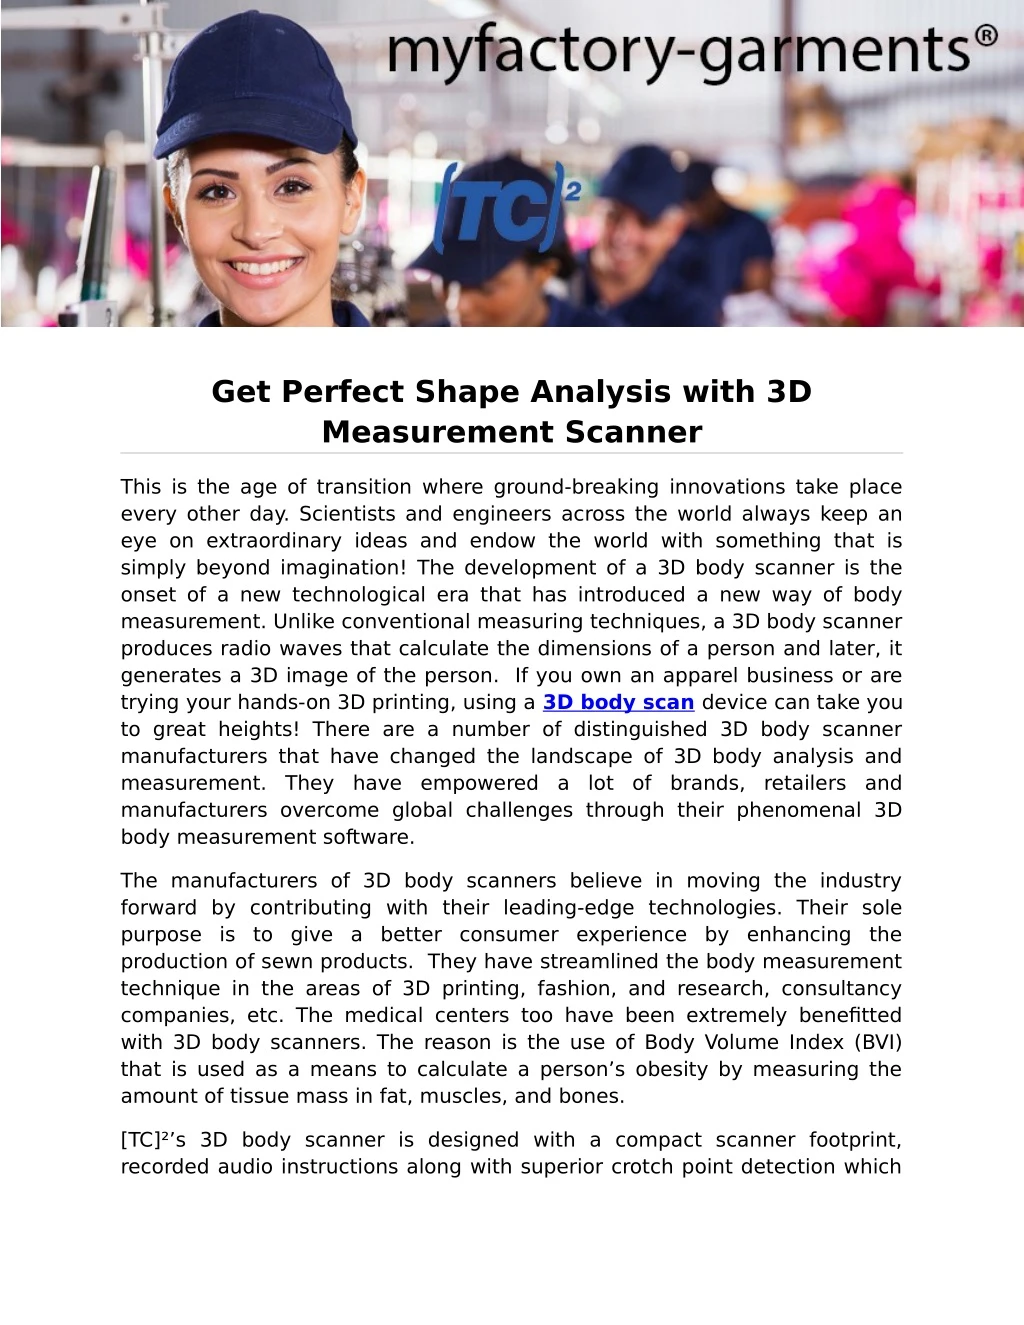 get perfect shape analysis with 3d measurement